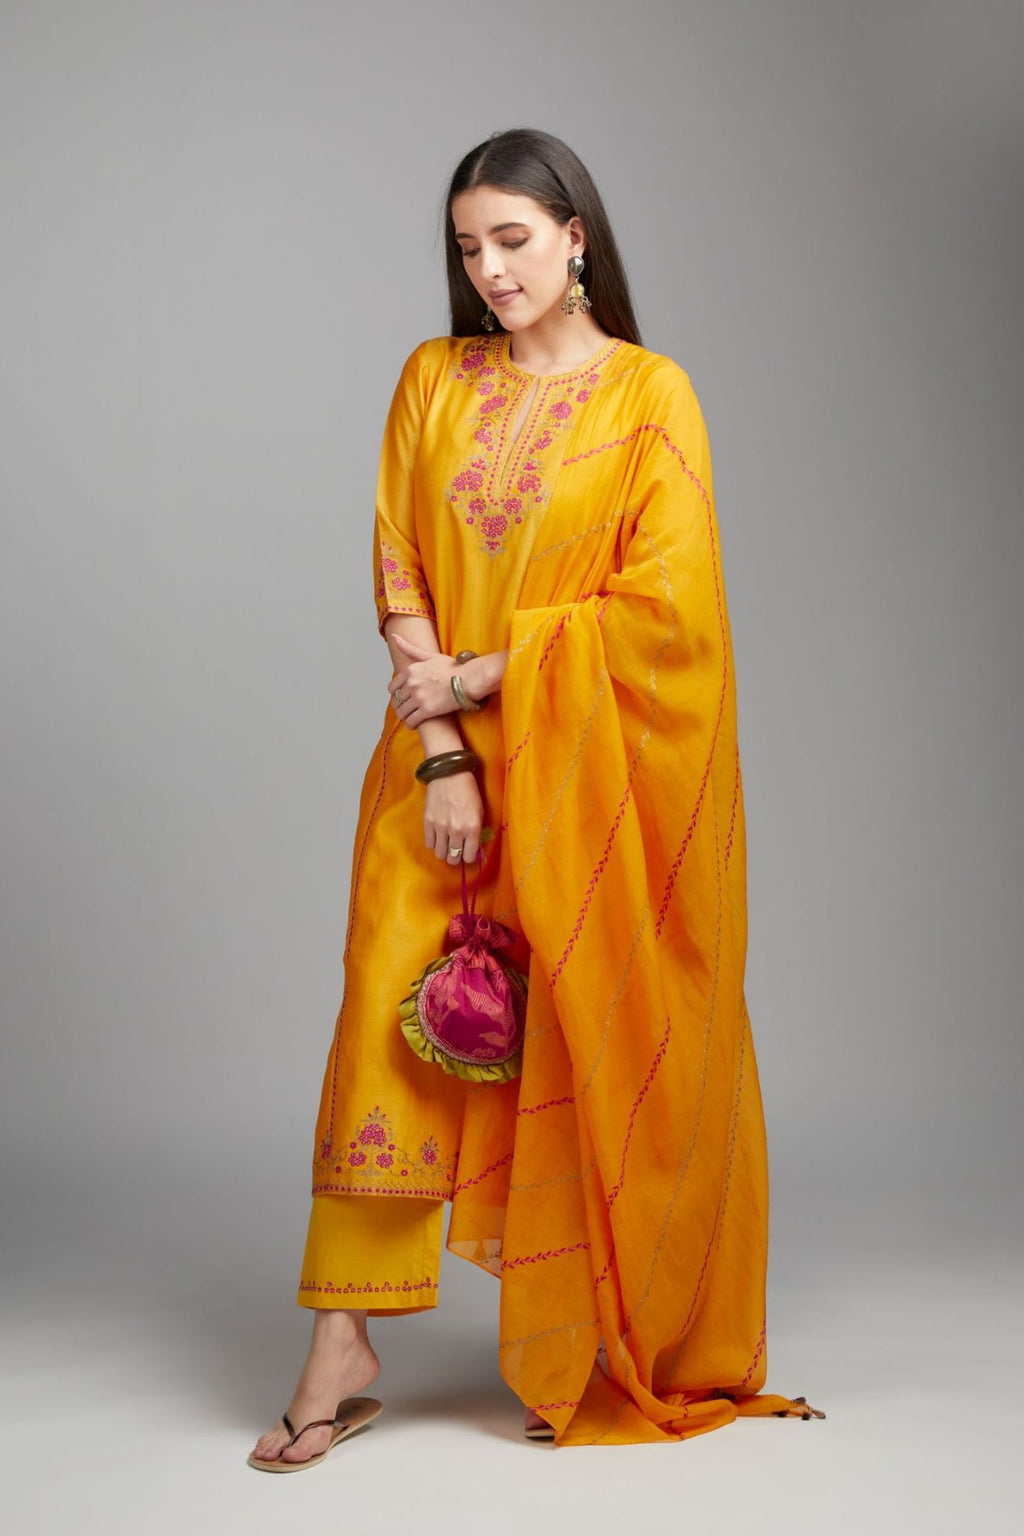 Mango yellow straight kurta set detailed with contrast coloured embroidery at neck and side panel joint seams